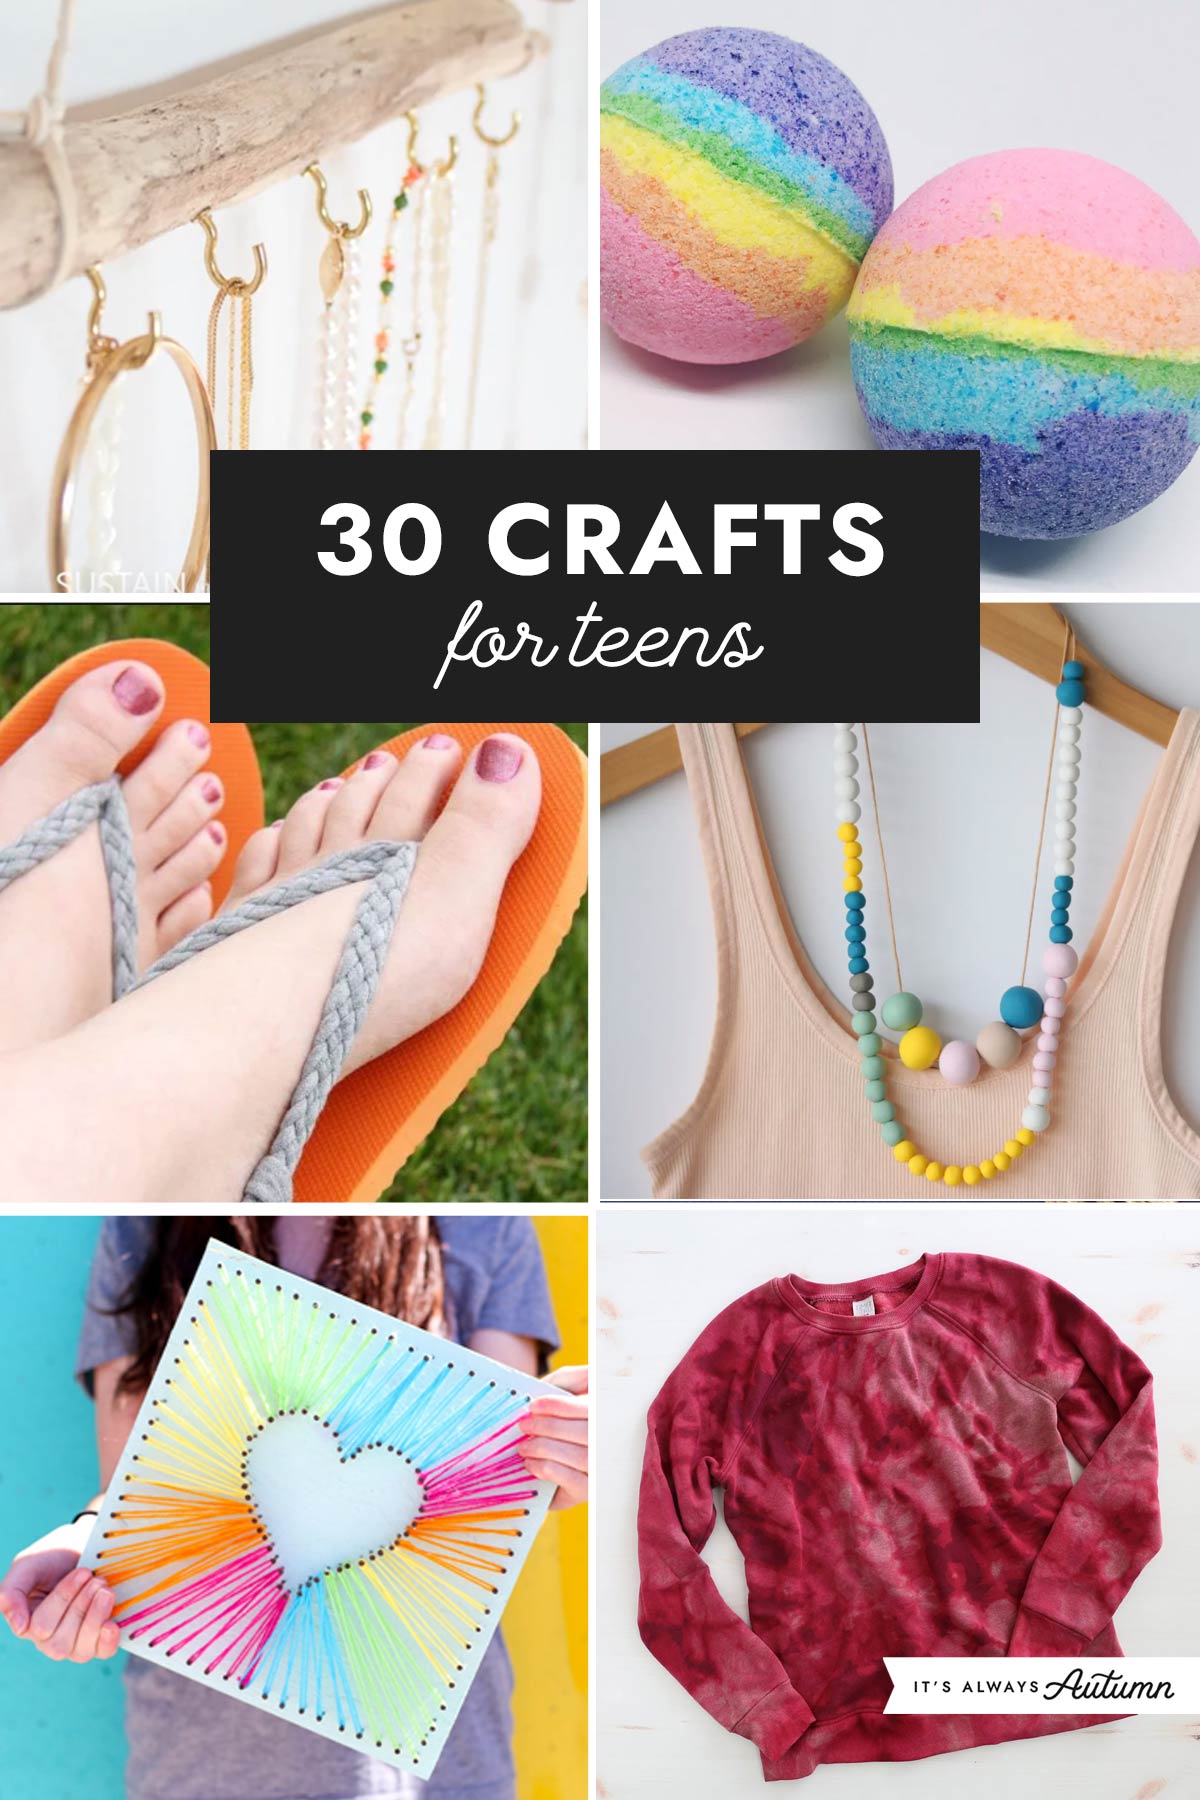 30 Fun Crafts for Teens that Will Bring Out Their Inner Artist  Fun crafts  for teens, Easy crafts for teens, Crafts for teens